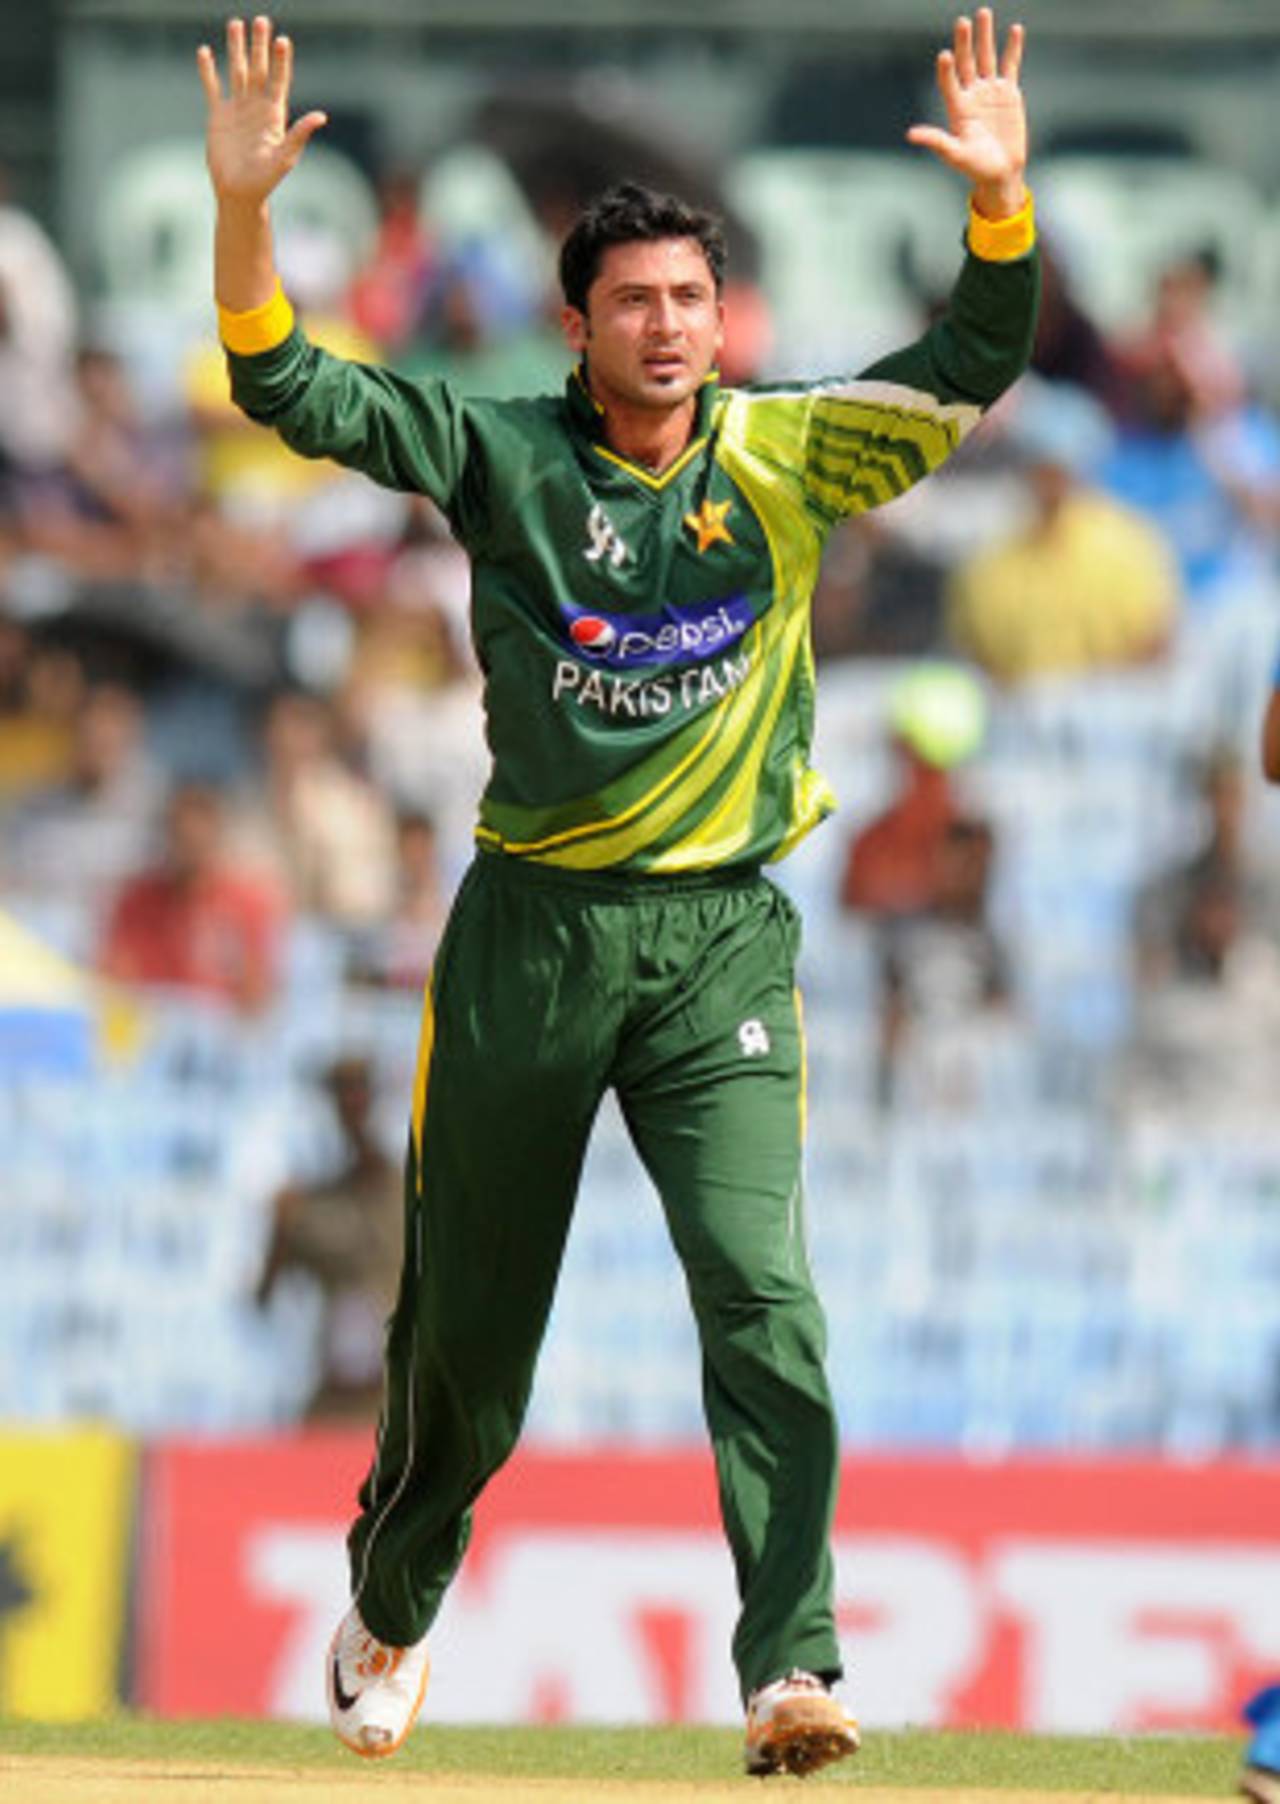 Junaid Khan took four wickets in his first spell, India v Pakistan, 1st ODI, Chennai, December 30, 2012